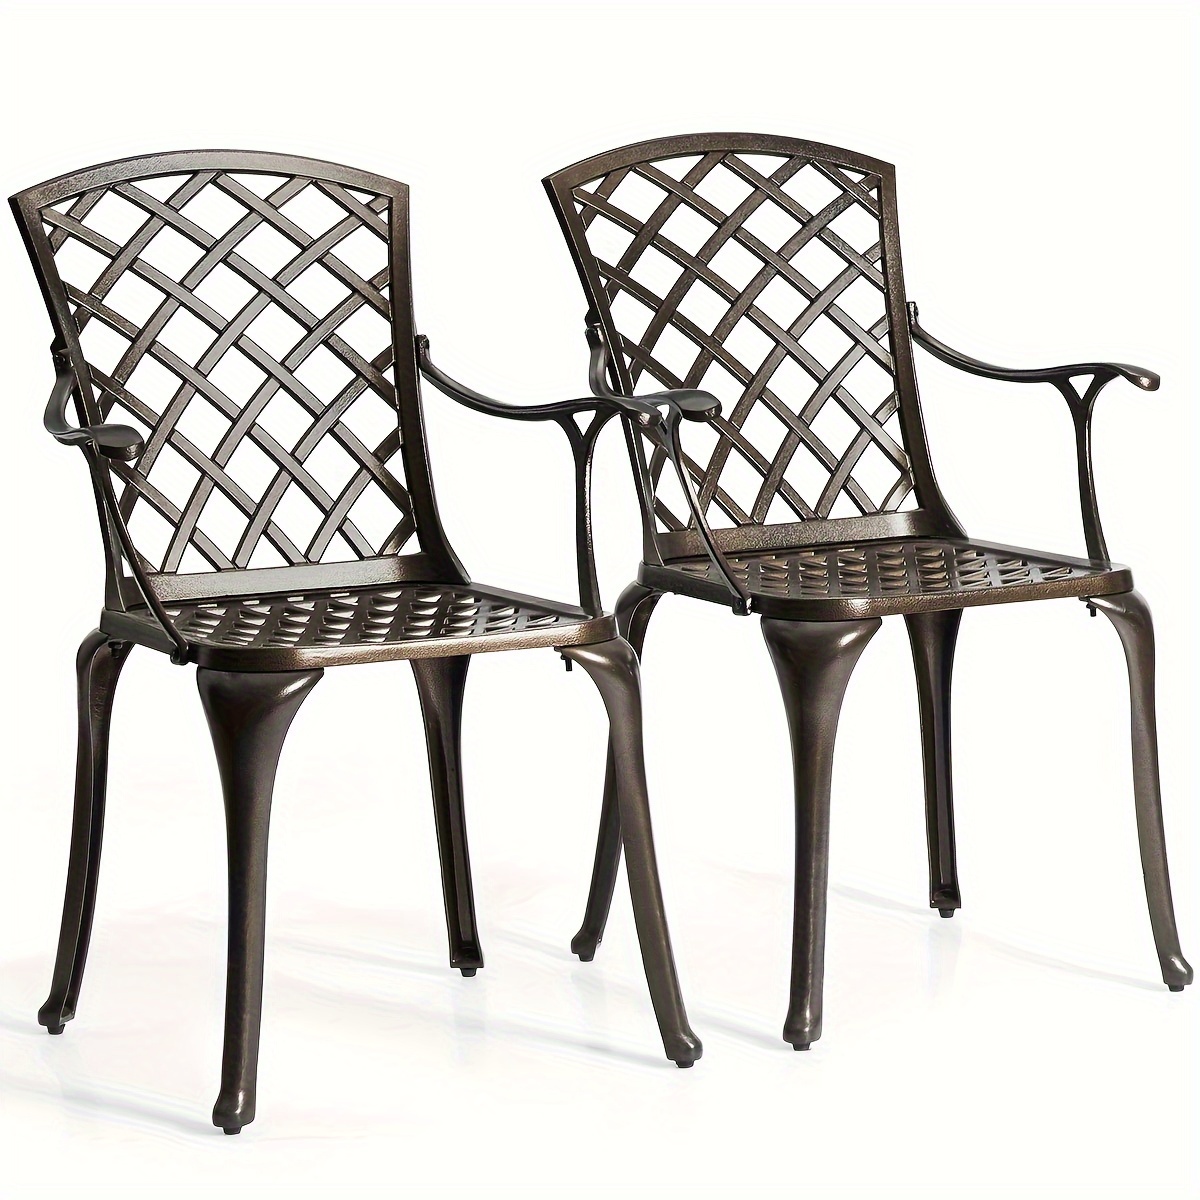 

Costway 2pcs/set Outdoor Cast Aluminum Arm Dining Chairs, Patio Bistro Chairs